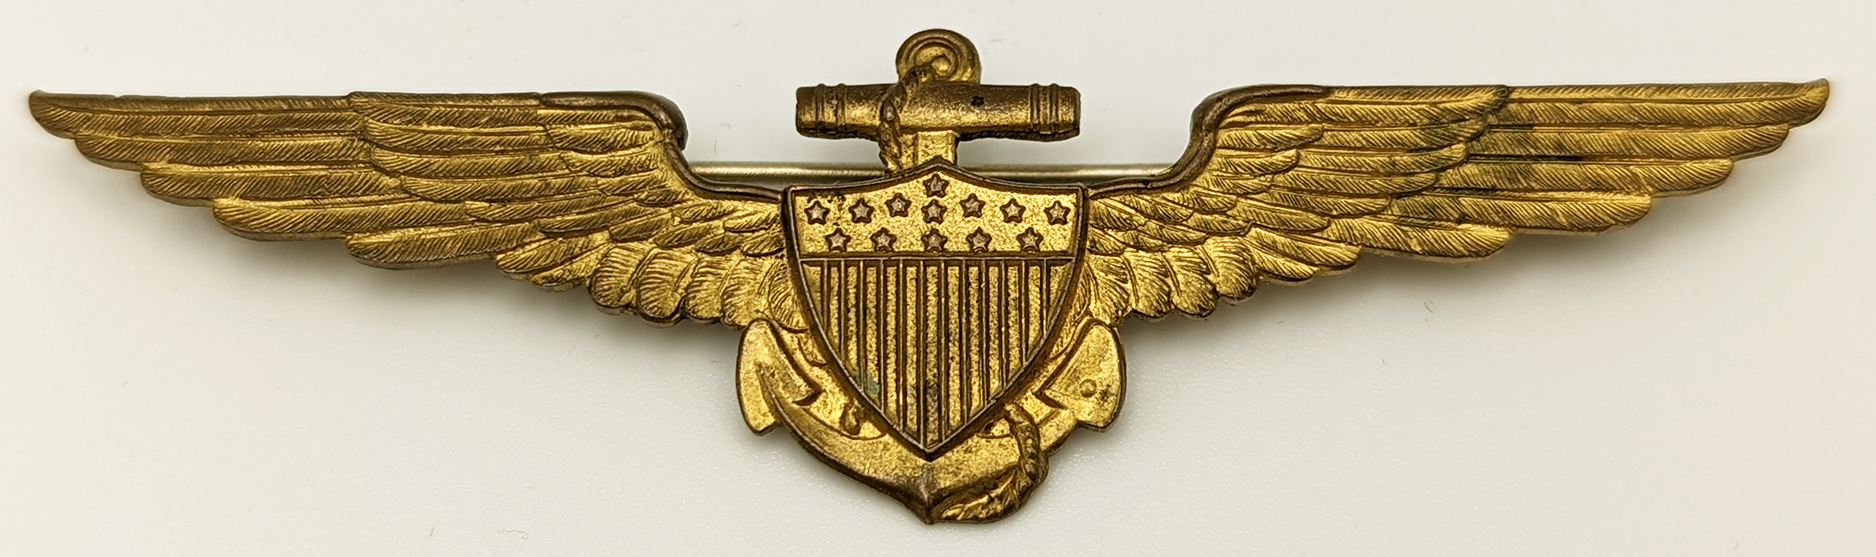 Gorgeous Oversize WWI USN Pilot Wing in Gilt Brass by Robert Stoll ...